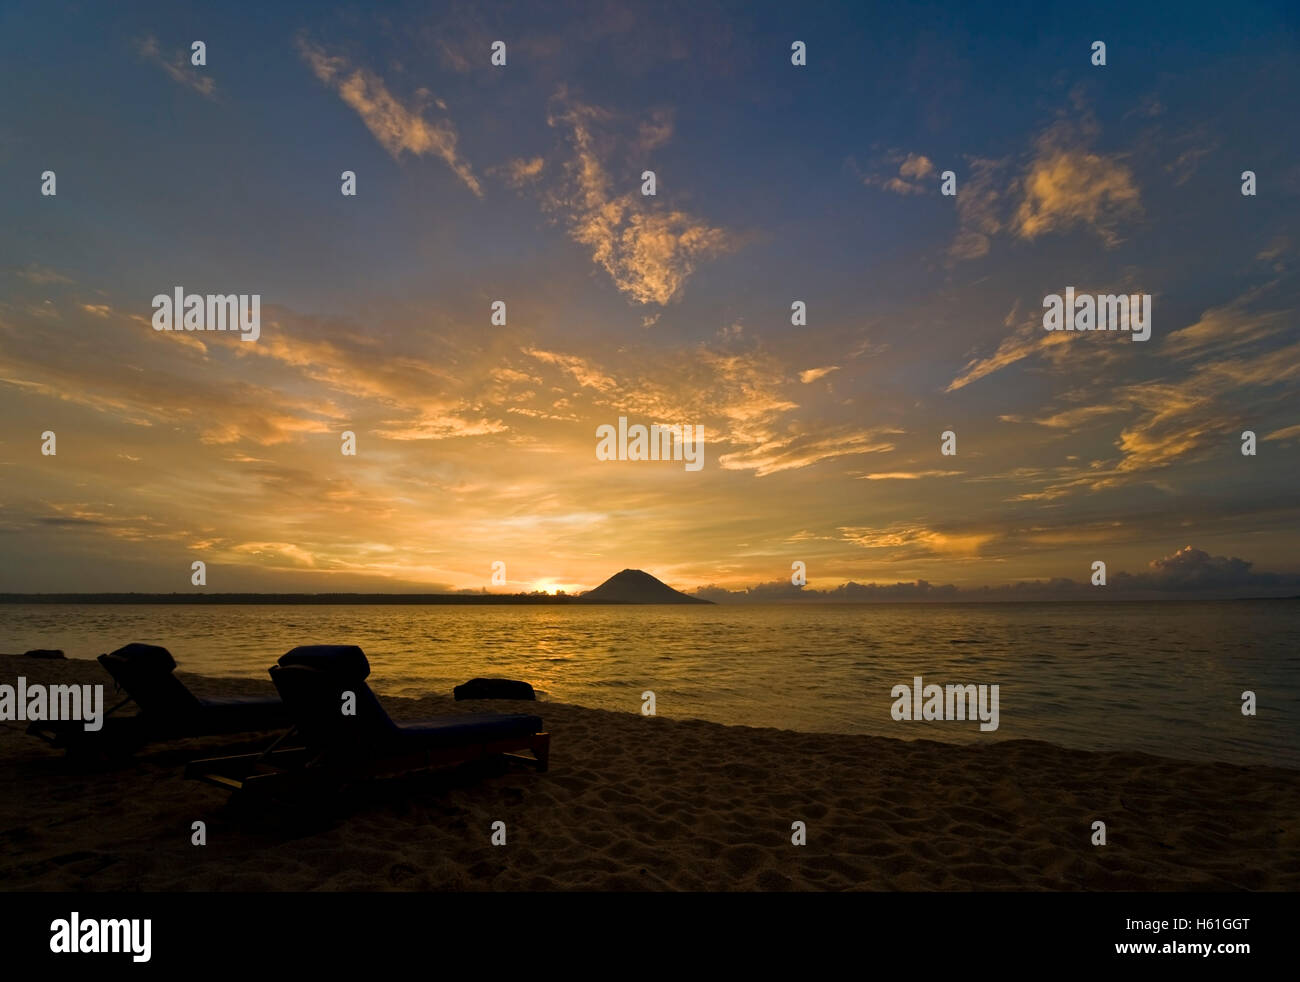 Sunbeds in front of sunset, Siladen island, Sulawesi, Indonesia, Southeast Asia Stock Photo